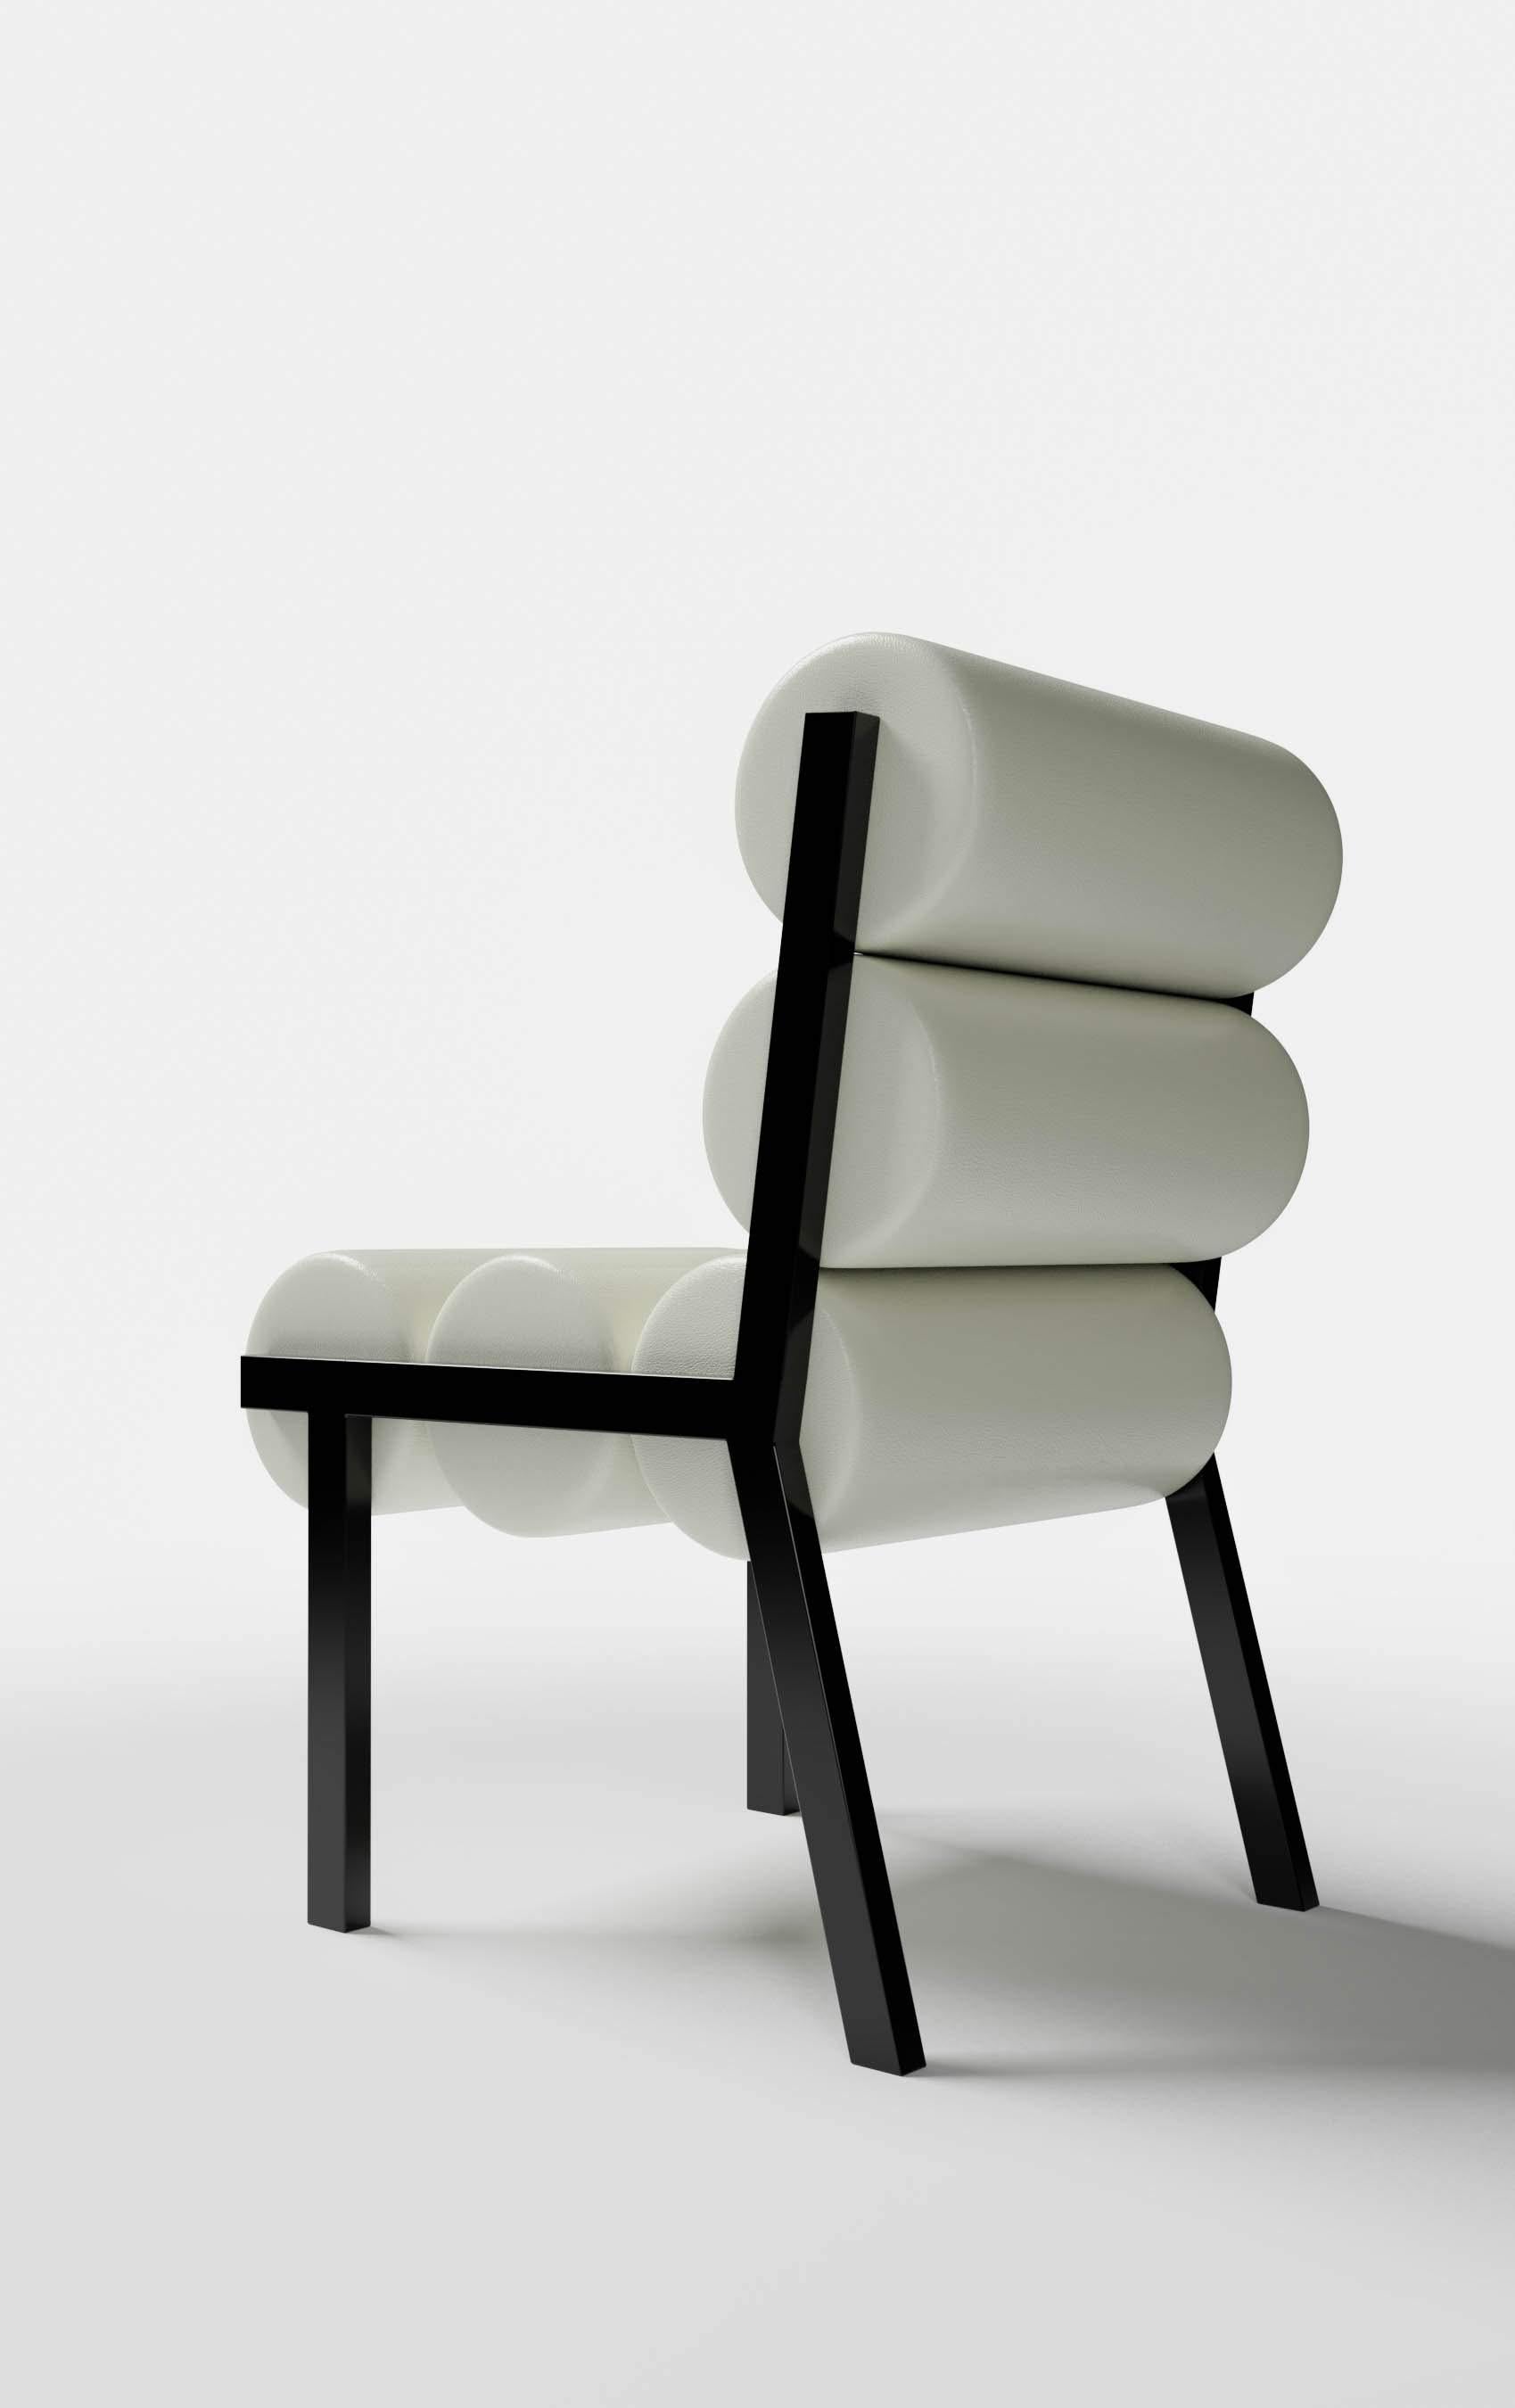 Hand-Crafted LIDO DINING CHAIR LOW - Modern Design in Leather with High Gloss Lacquer Legs